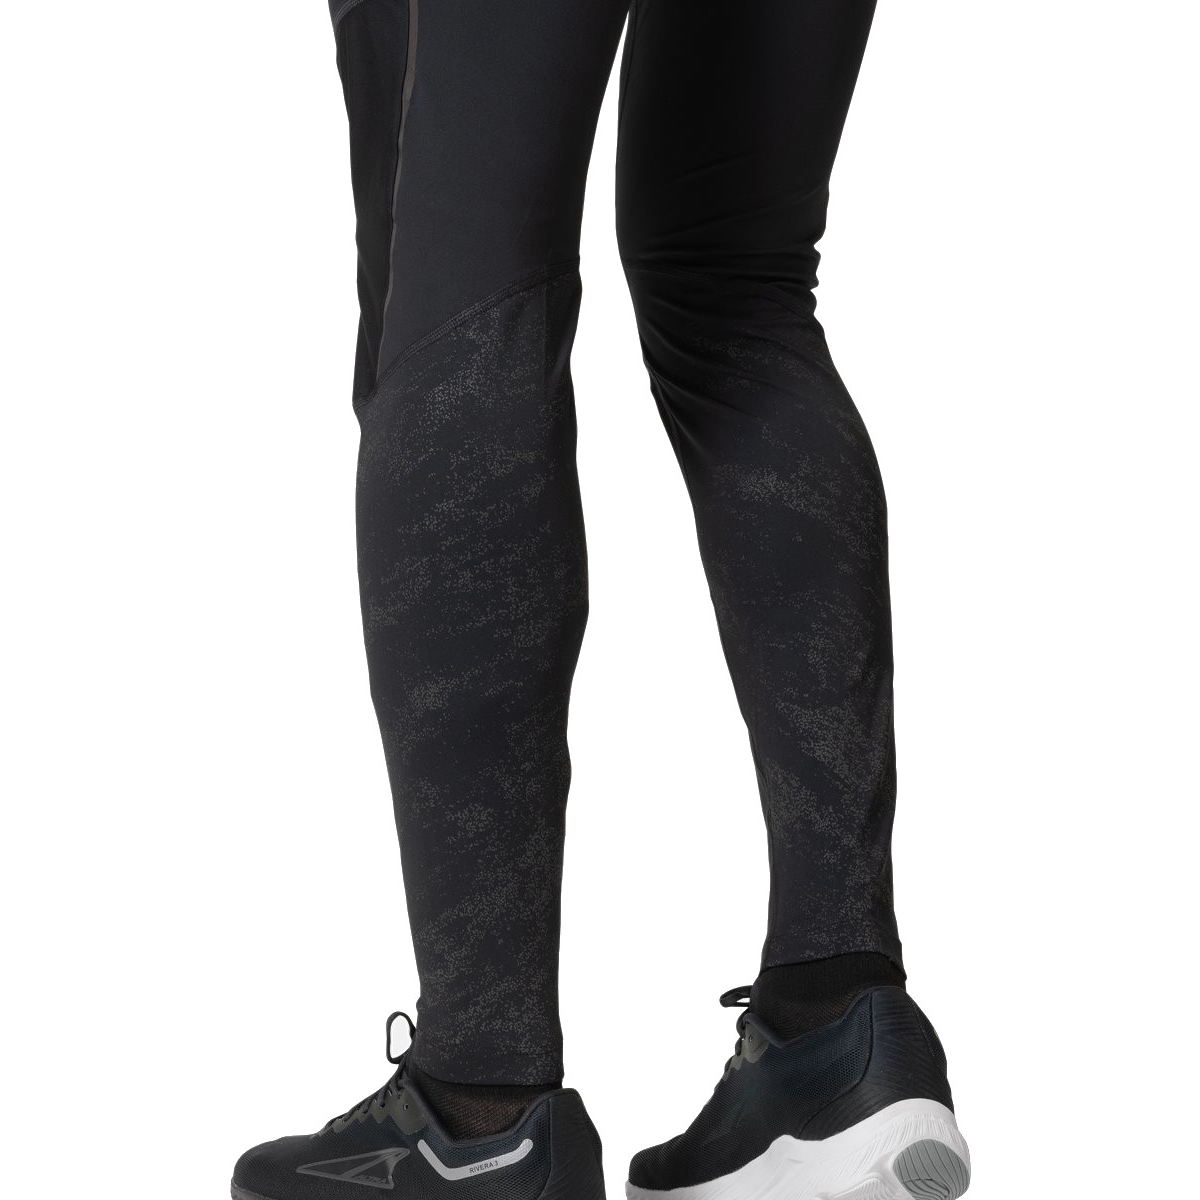 Collants running Femme Odlo - Tights Essential - Black - Before Riding